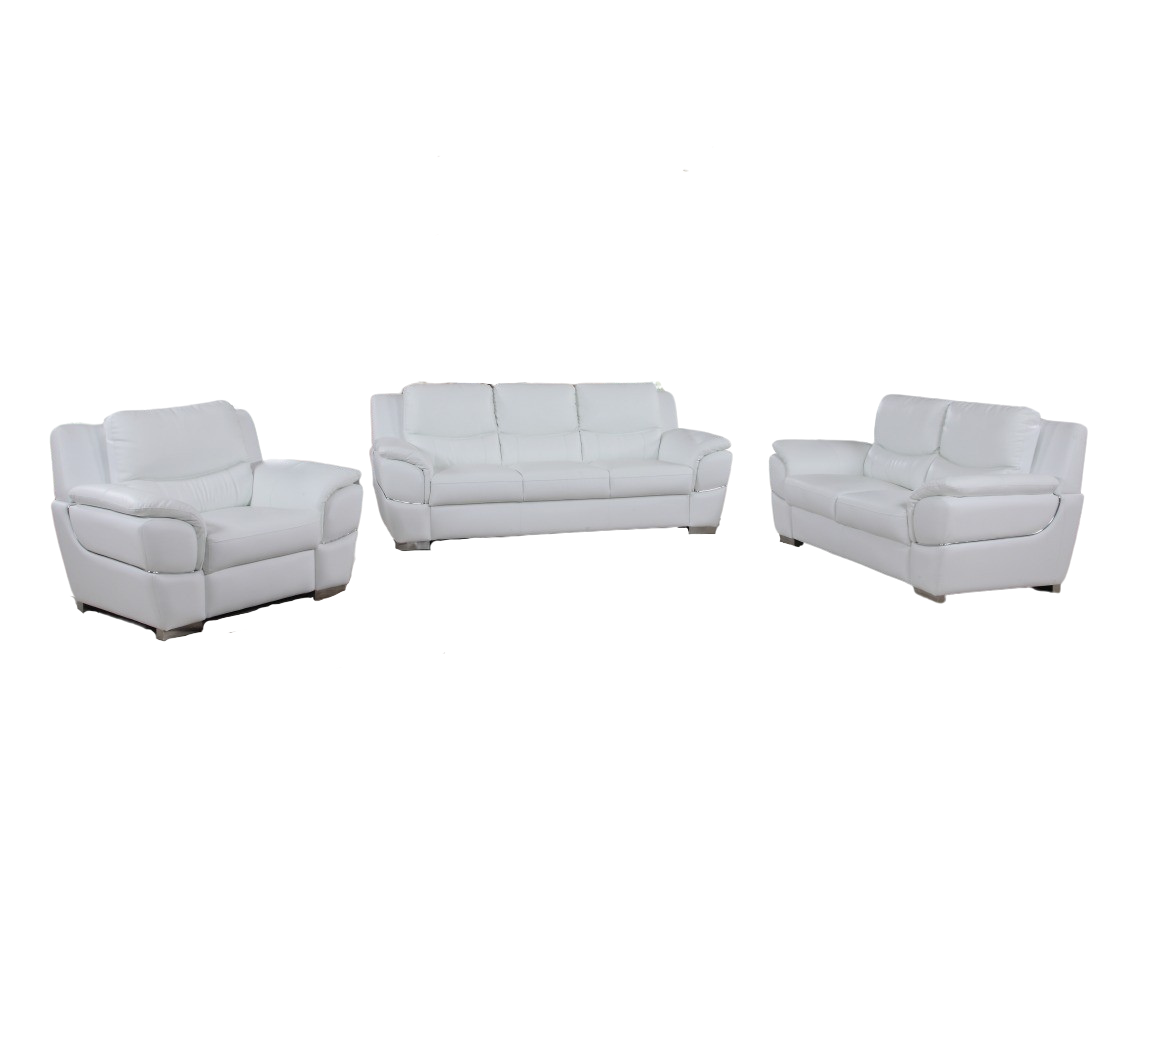 Three Piece Indoor White Genuine Leather Six Person Seating Set-329478-1